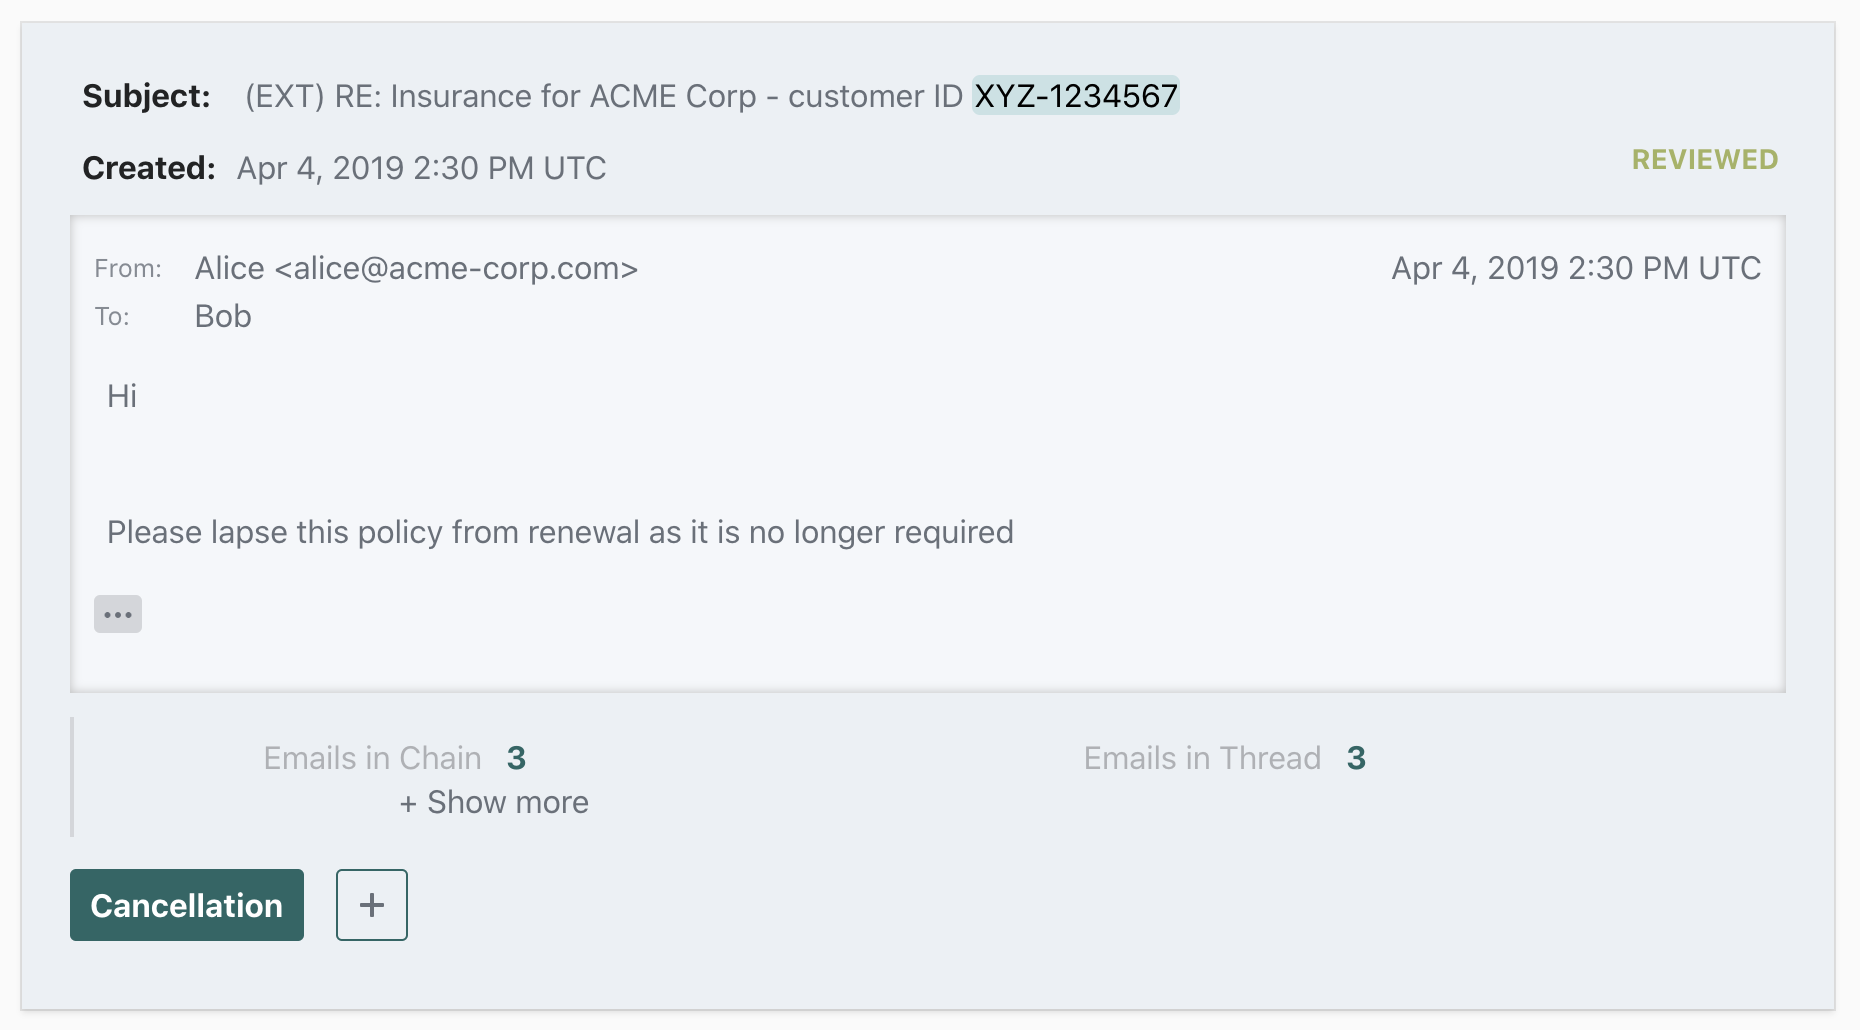 Reviewed comment with assigned "Cancellation" label and extracted "Customer ID" entity